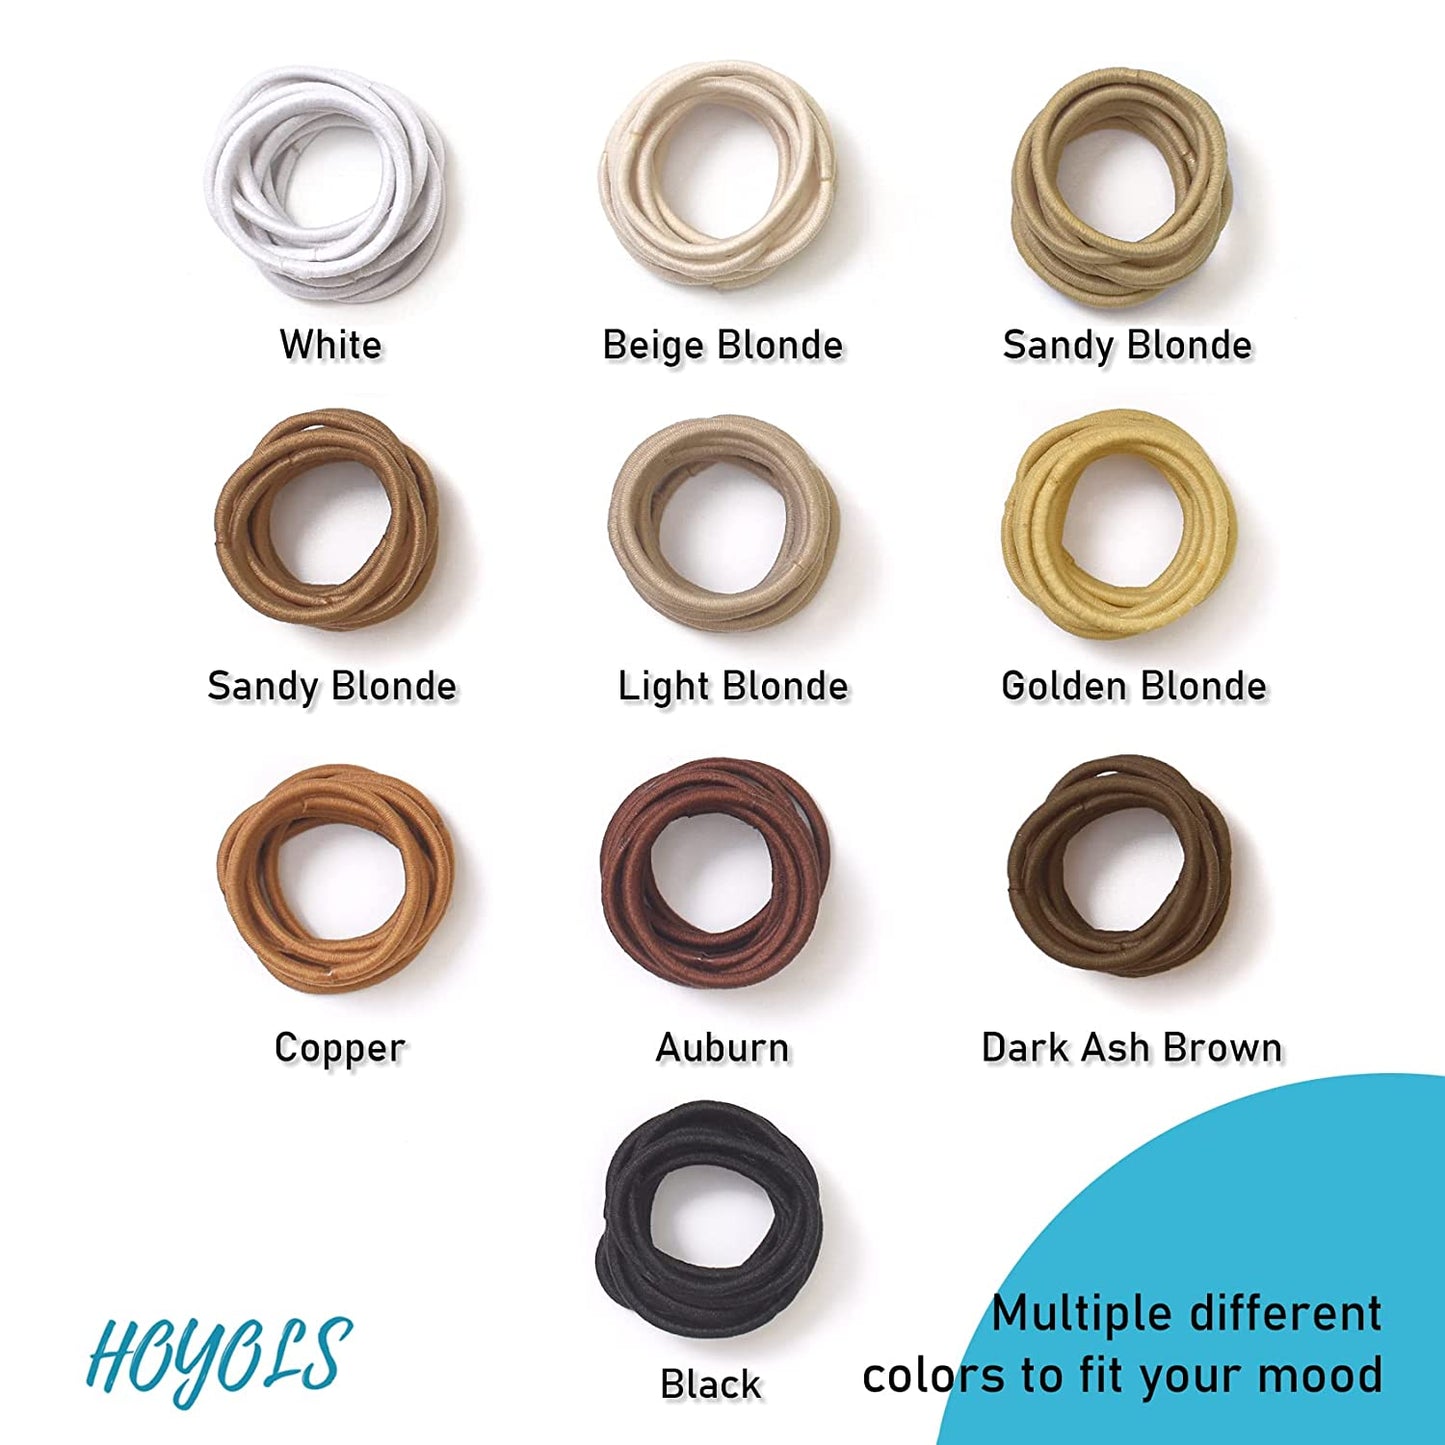 Hoyols 1” Thin Hair Ties Elastic for Fine Hair, Hair Bands for Baby Girls Kids Hair Ponytail Holders Hair Ties Polybands Brown 100 Count 2mm (Auburn)